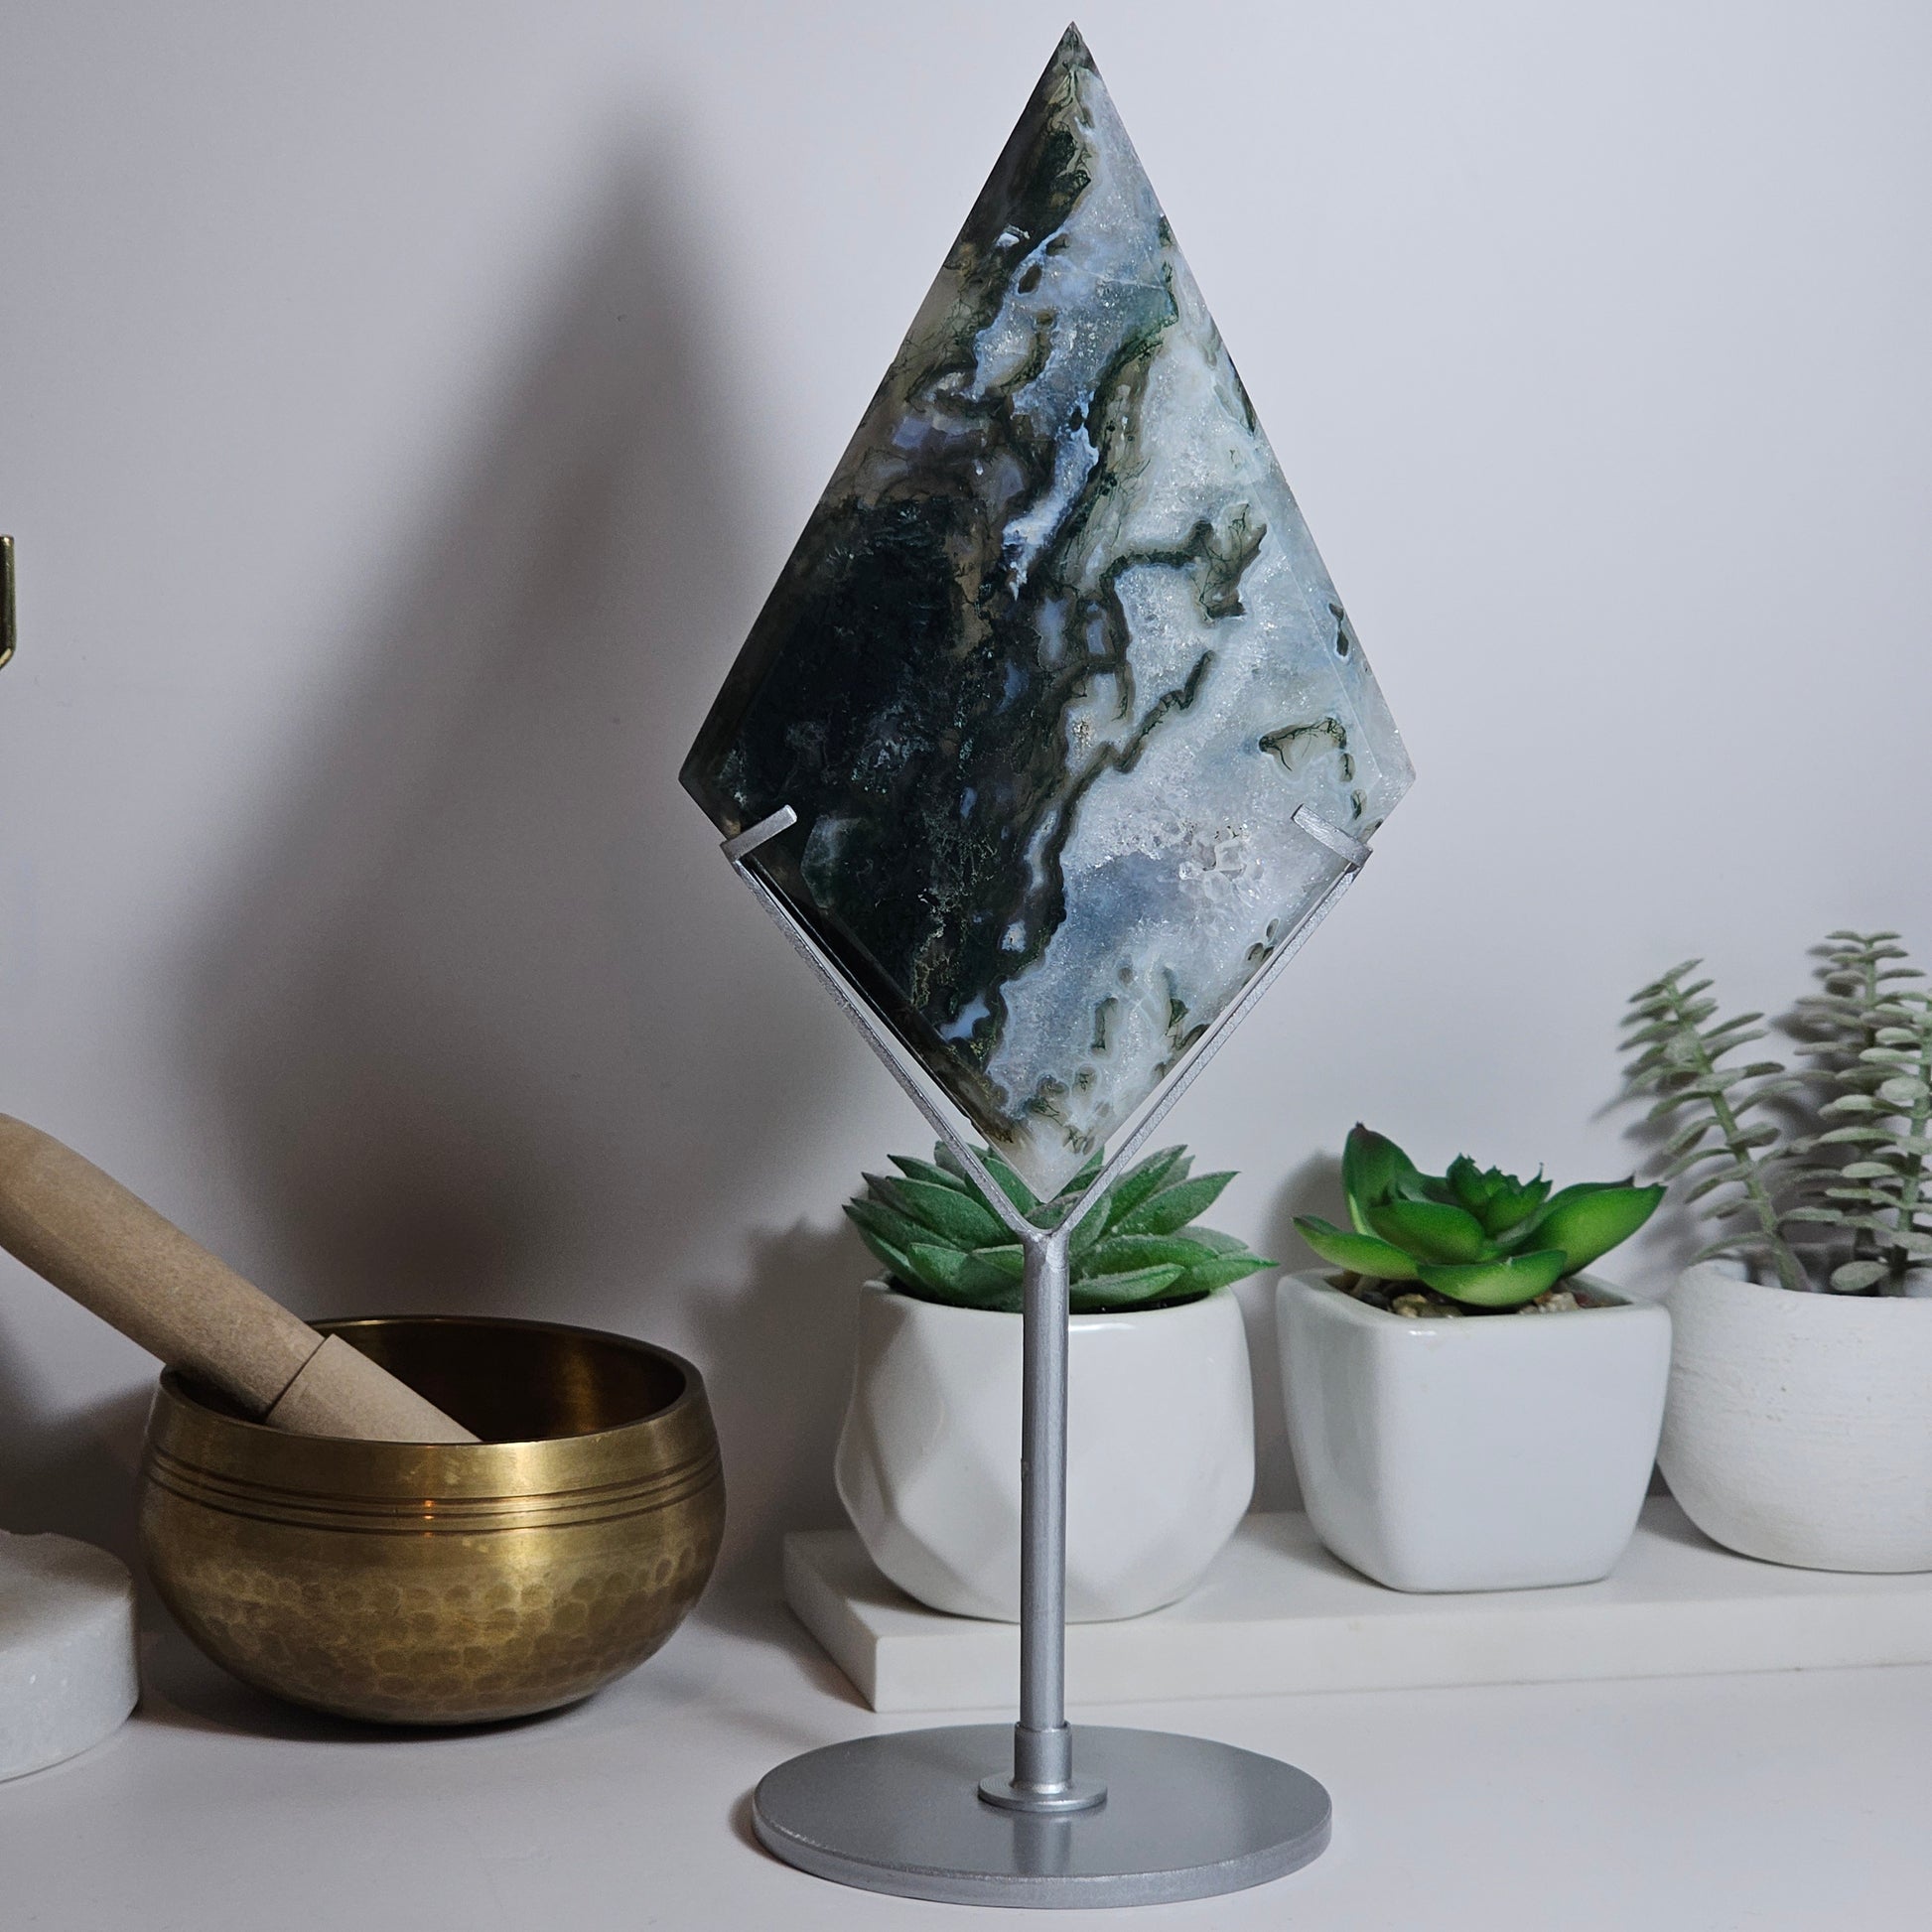 24.5cm beautiful display piece, this diamond shaped Moss Agate carving comes with its own custom matte silver stand.